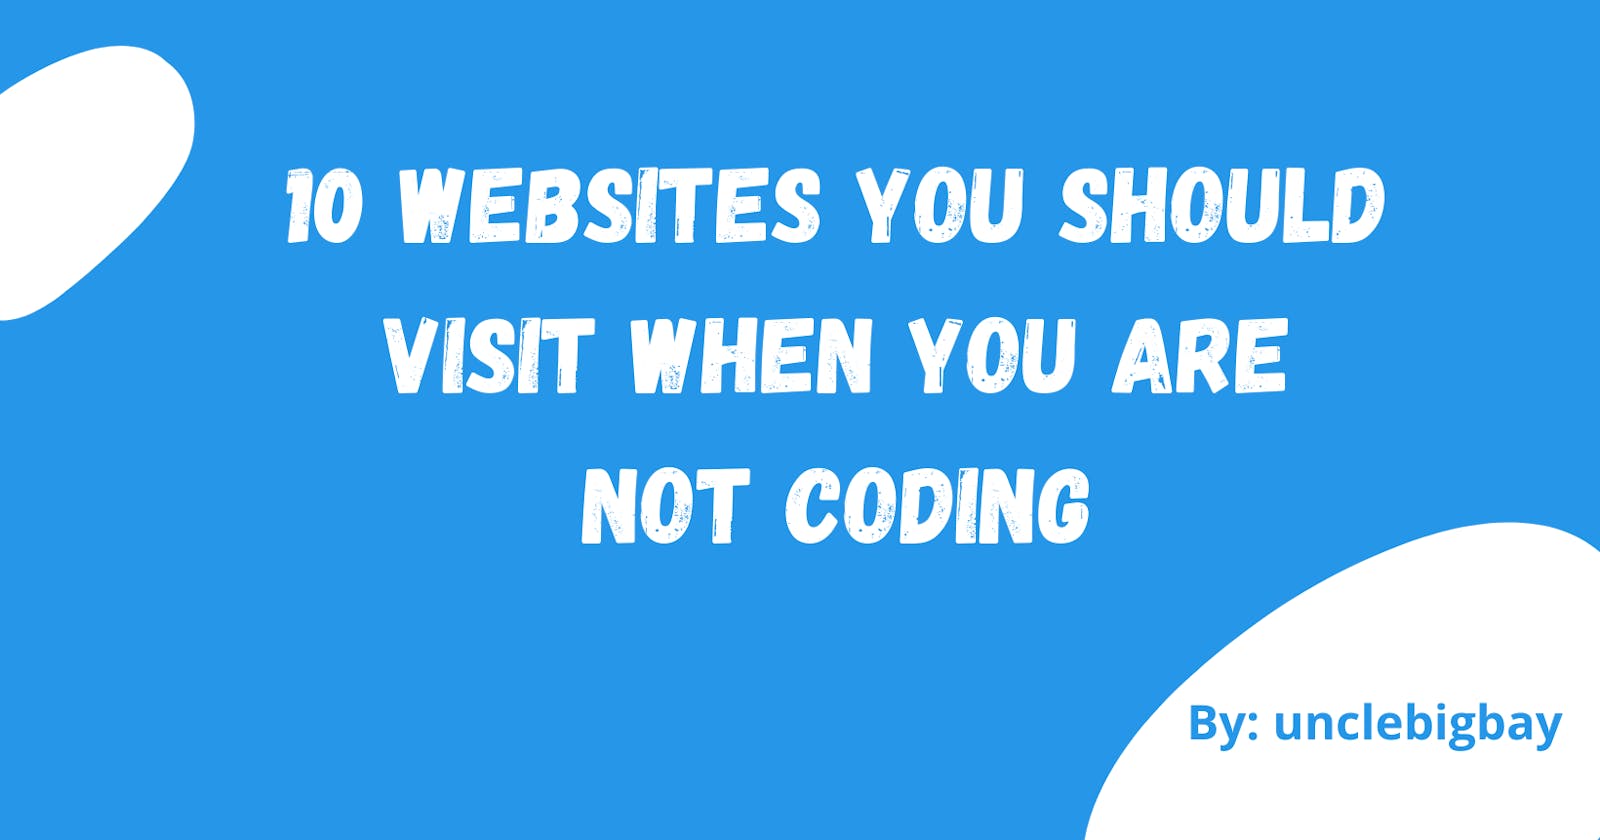 10 websites you should visit when you are not coding